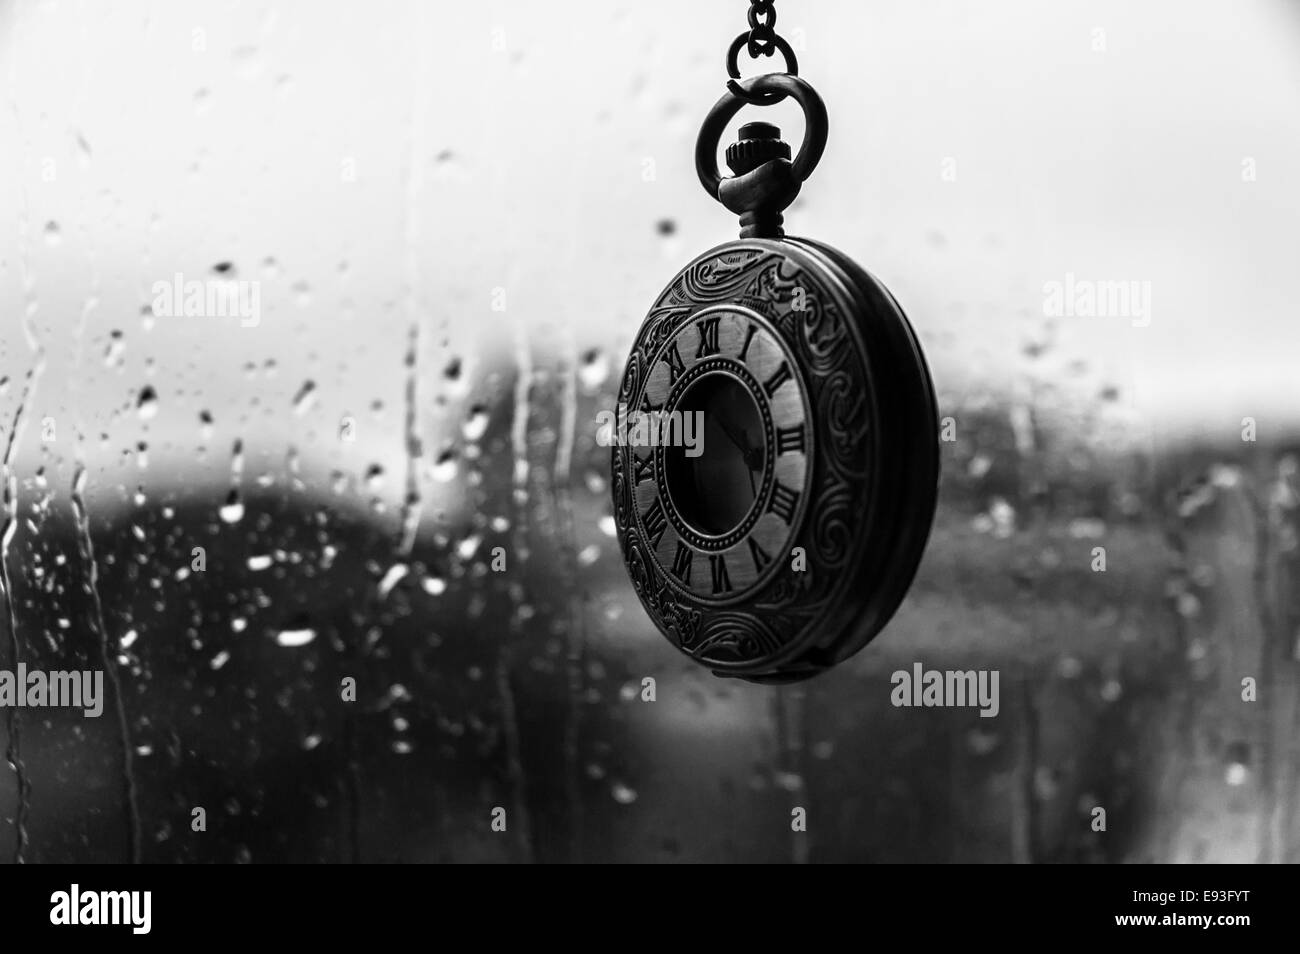 An old antique clock in the rain Stock Photo